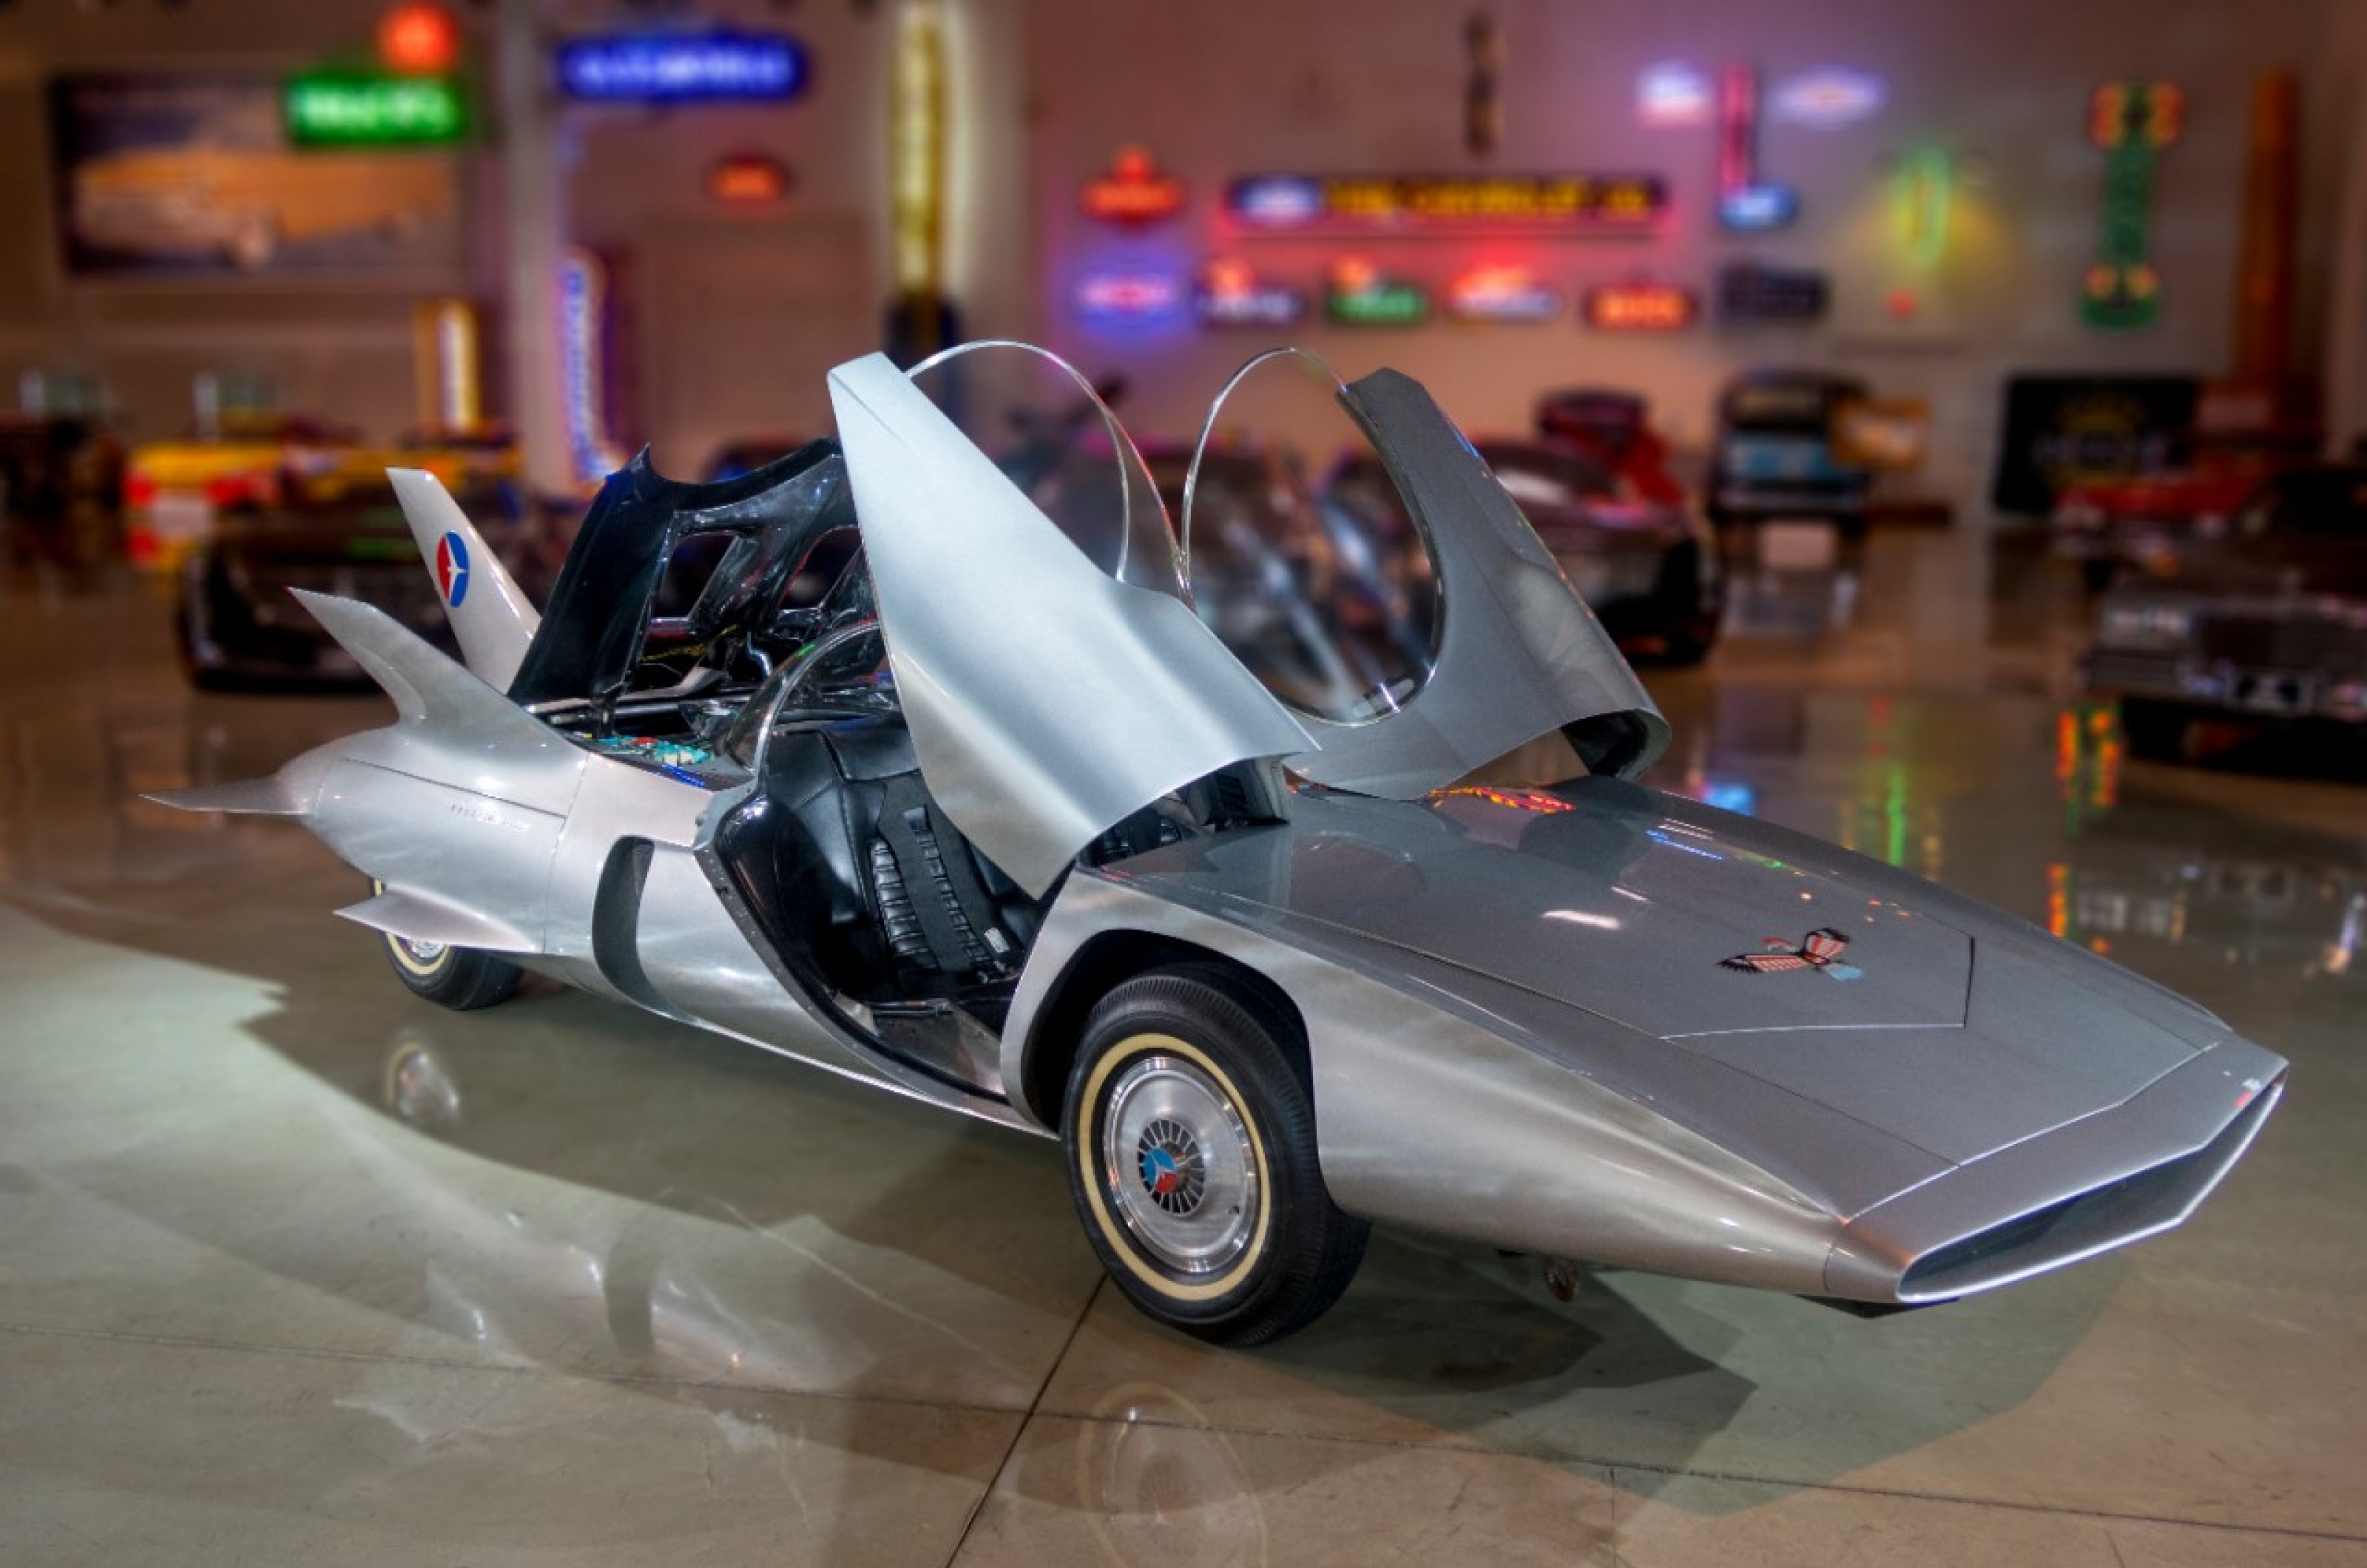 <p>GM’s Firebird concept cars were immediately recognizable for their jet-like design and interesting cockpits.</p>  <p>The Firebird III, of 1958, featured a double-bubble canopy that was accessed through a set of doors that tilted up and forwards.</p>  <p>When the doors were closed, the transparent rear quarter-spherical panels joined with the door glass to create two capsules for the driver and passenger.</p>  <p>In keeping with the aviation theme, the Firebird III had nine fins across the bodywork and was controlled inside with a joystick.</p>  <p>This was the lightest and most fuel efficient of the Firebird cars, thanks to its fiberglass bodywork.</p>  <p>It was powered by a GT-305 Whirlfire engine, but required a second unit to power the self-leveling suspension, air conditioning and power steering.</p>